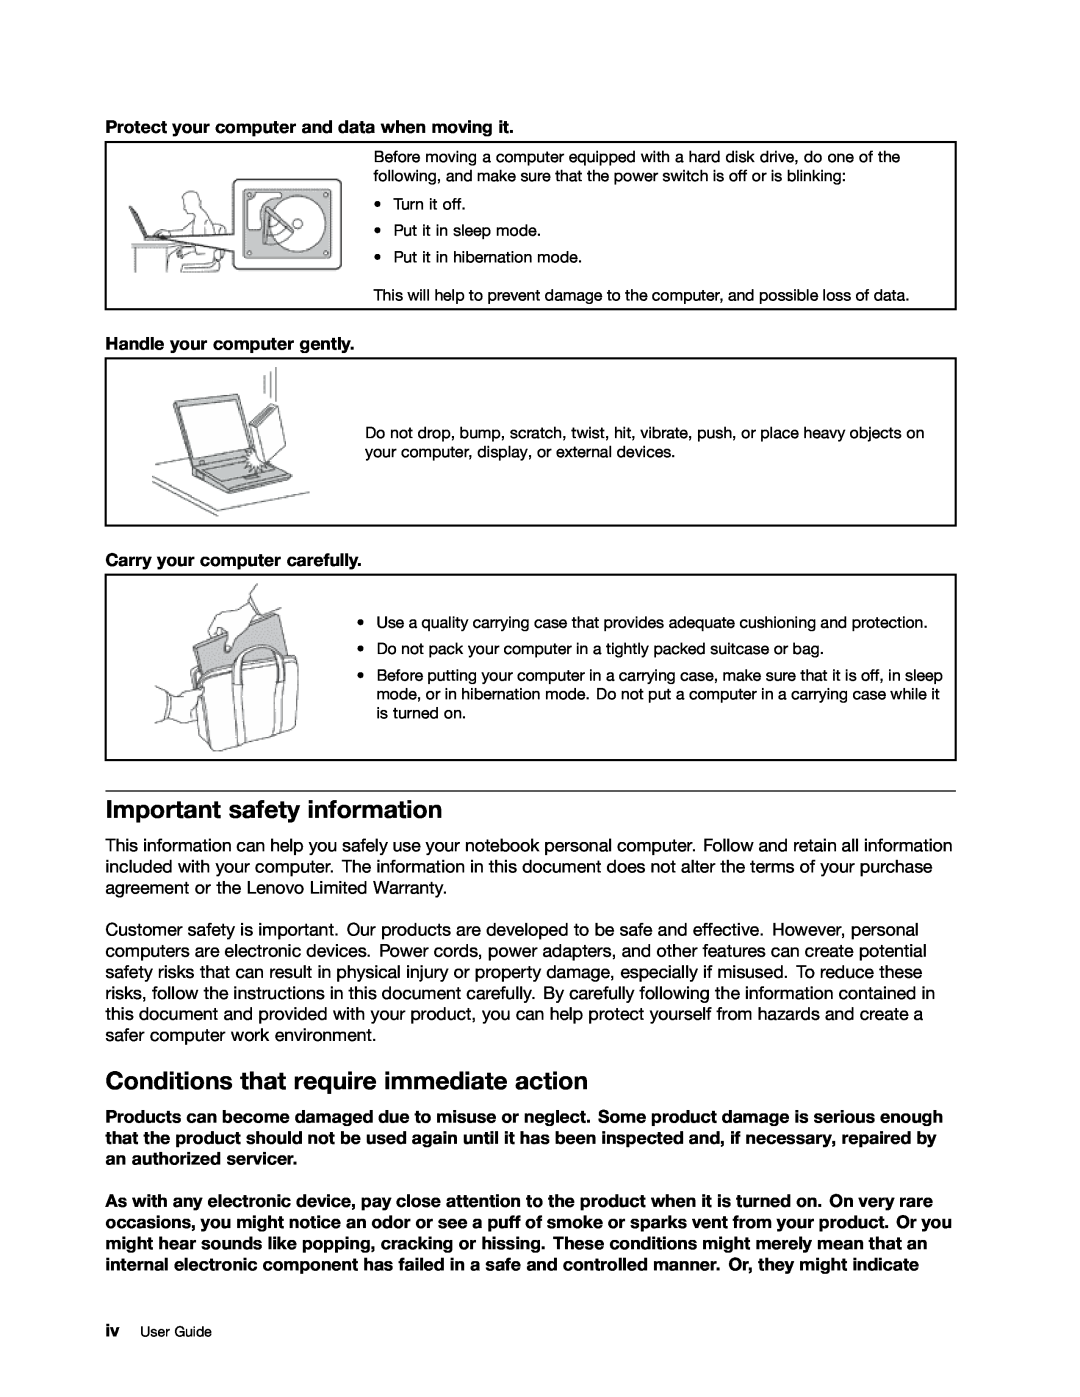 Lenovo 59366616 manual Important safety information, Conditions that require immediate action, Handle your computer gently 